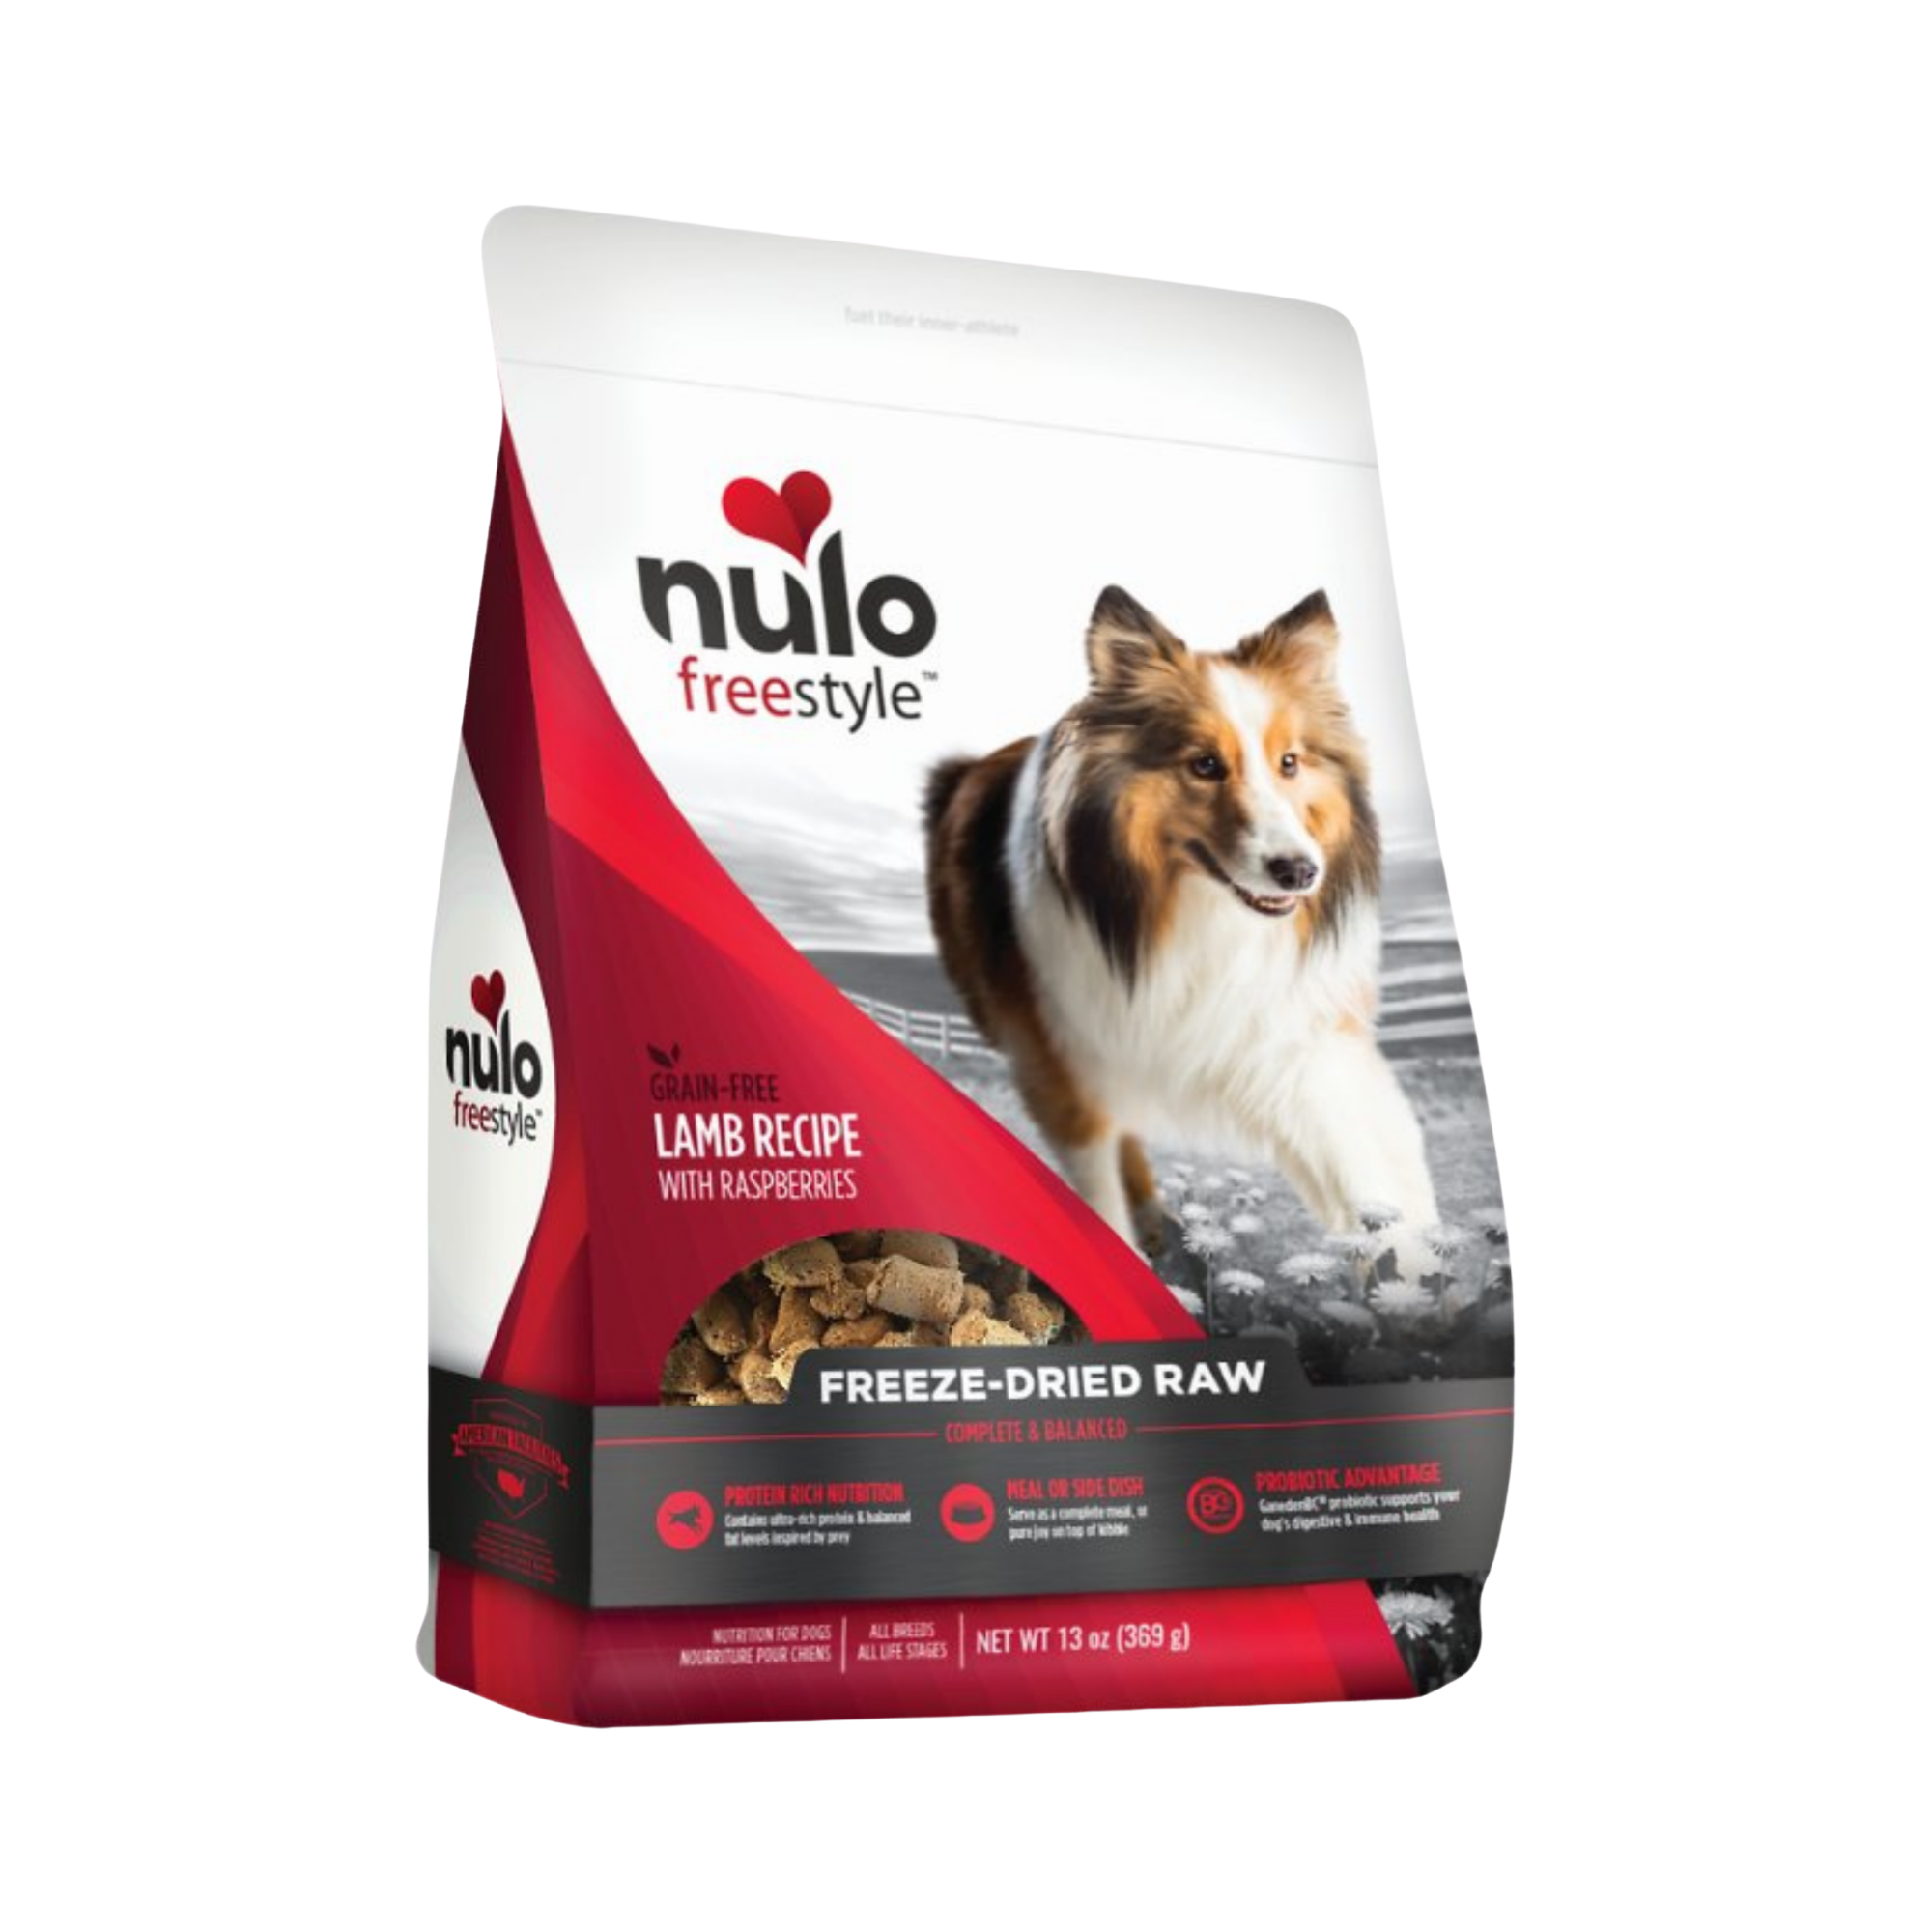 Nulo Freestyle Grain-Free Lamb with Raspberries Recipe Freeze-Dried Dog Food - Mutts & Co.